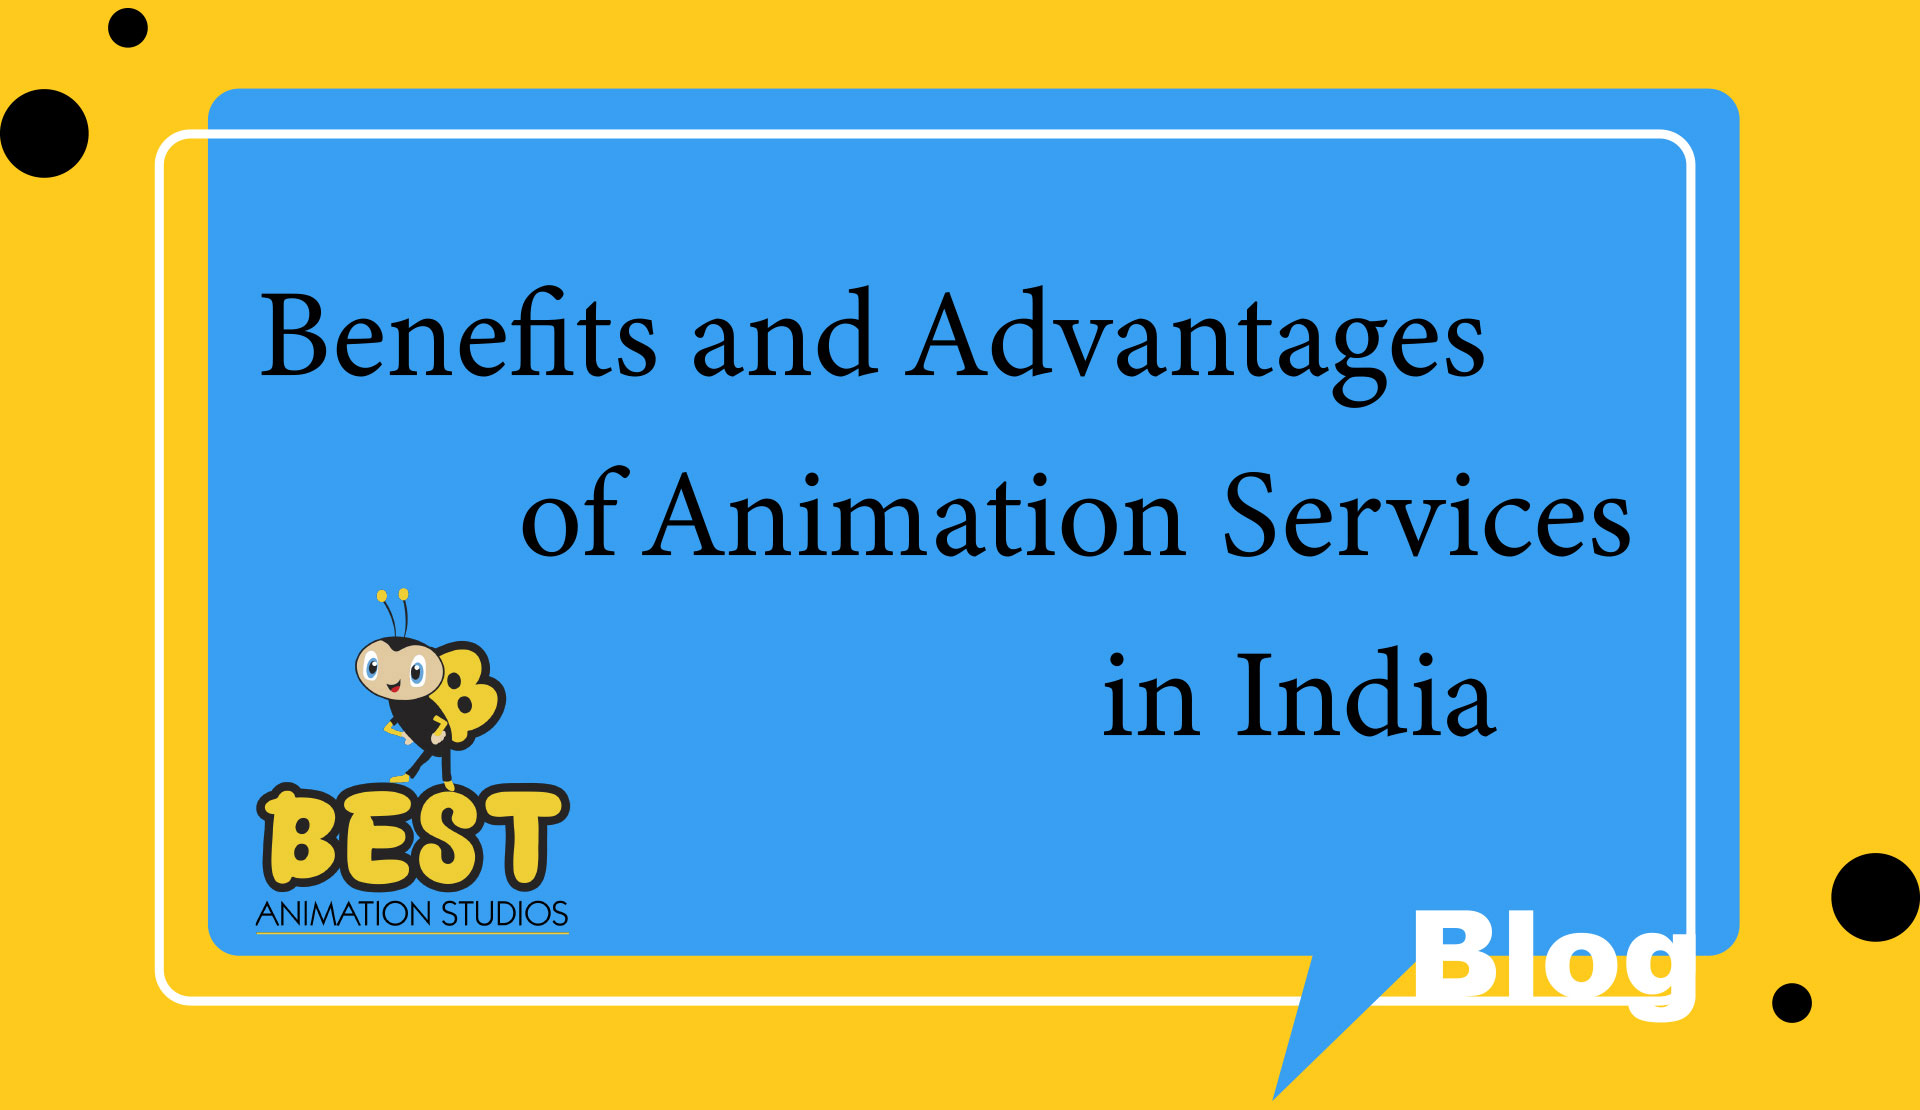 Advantages of Animation Services in India